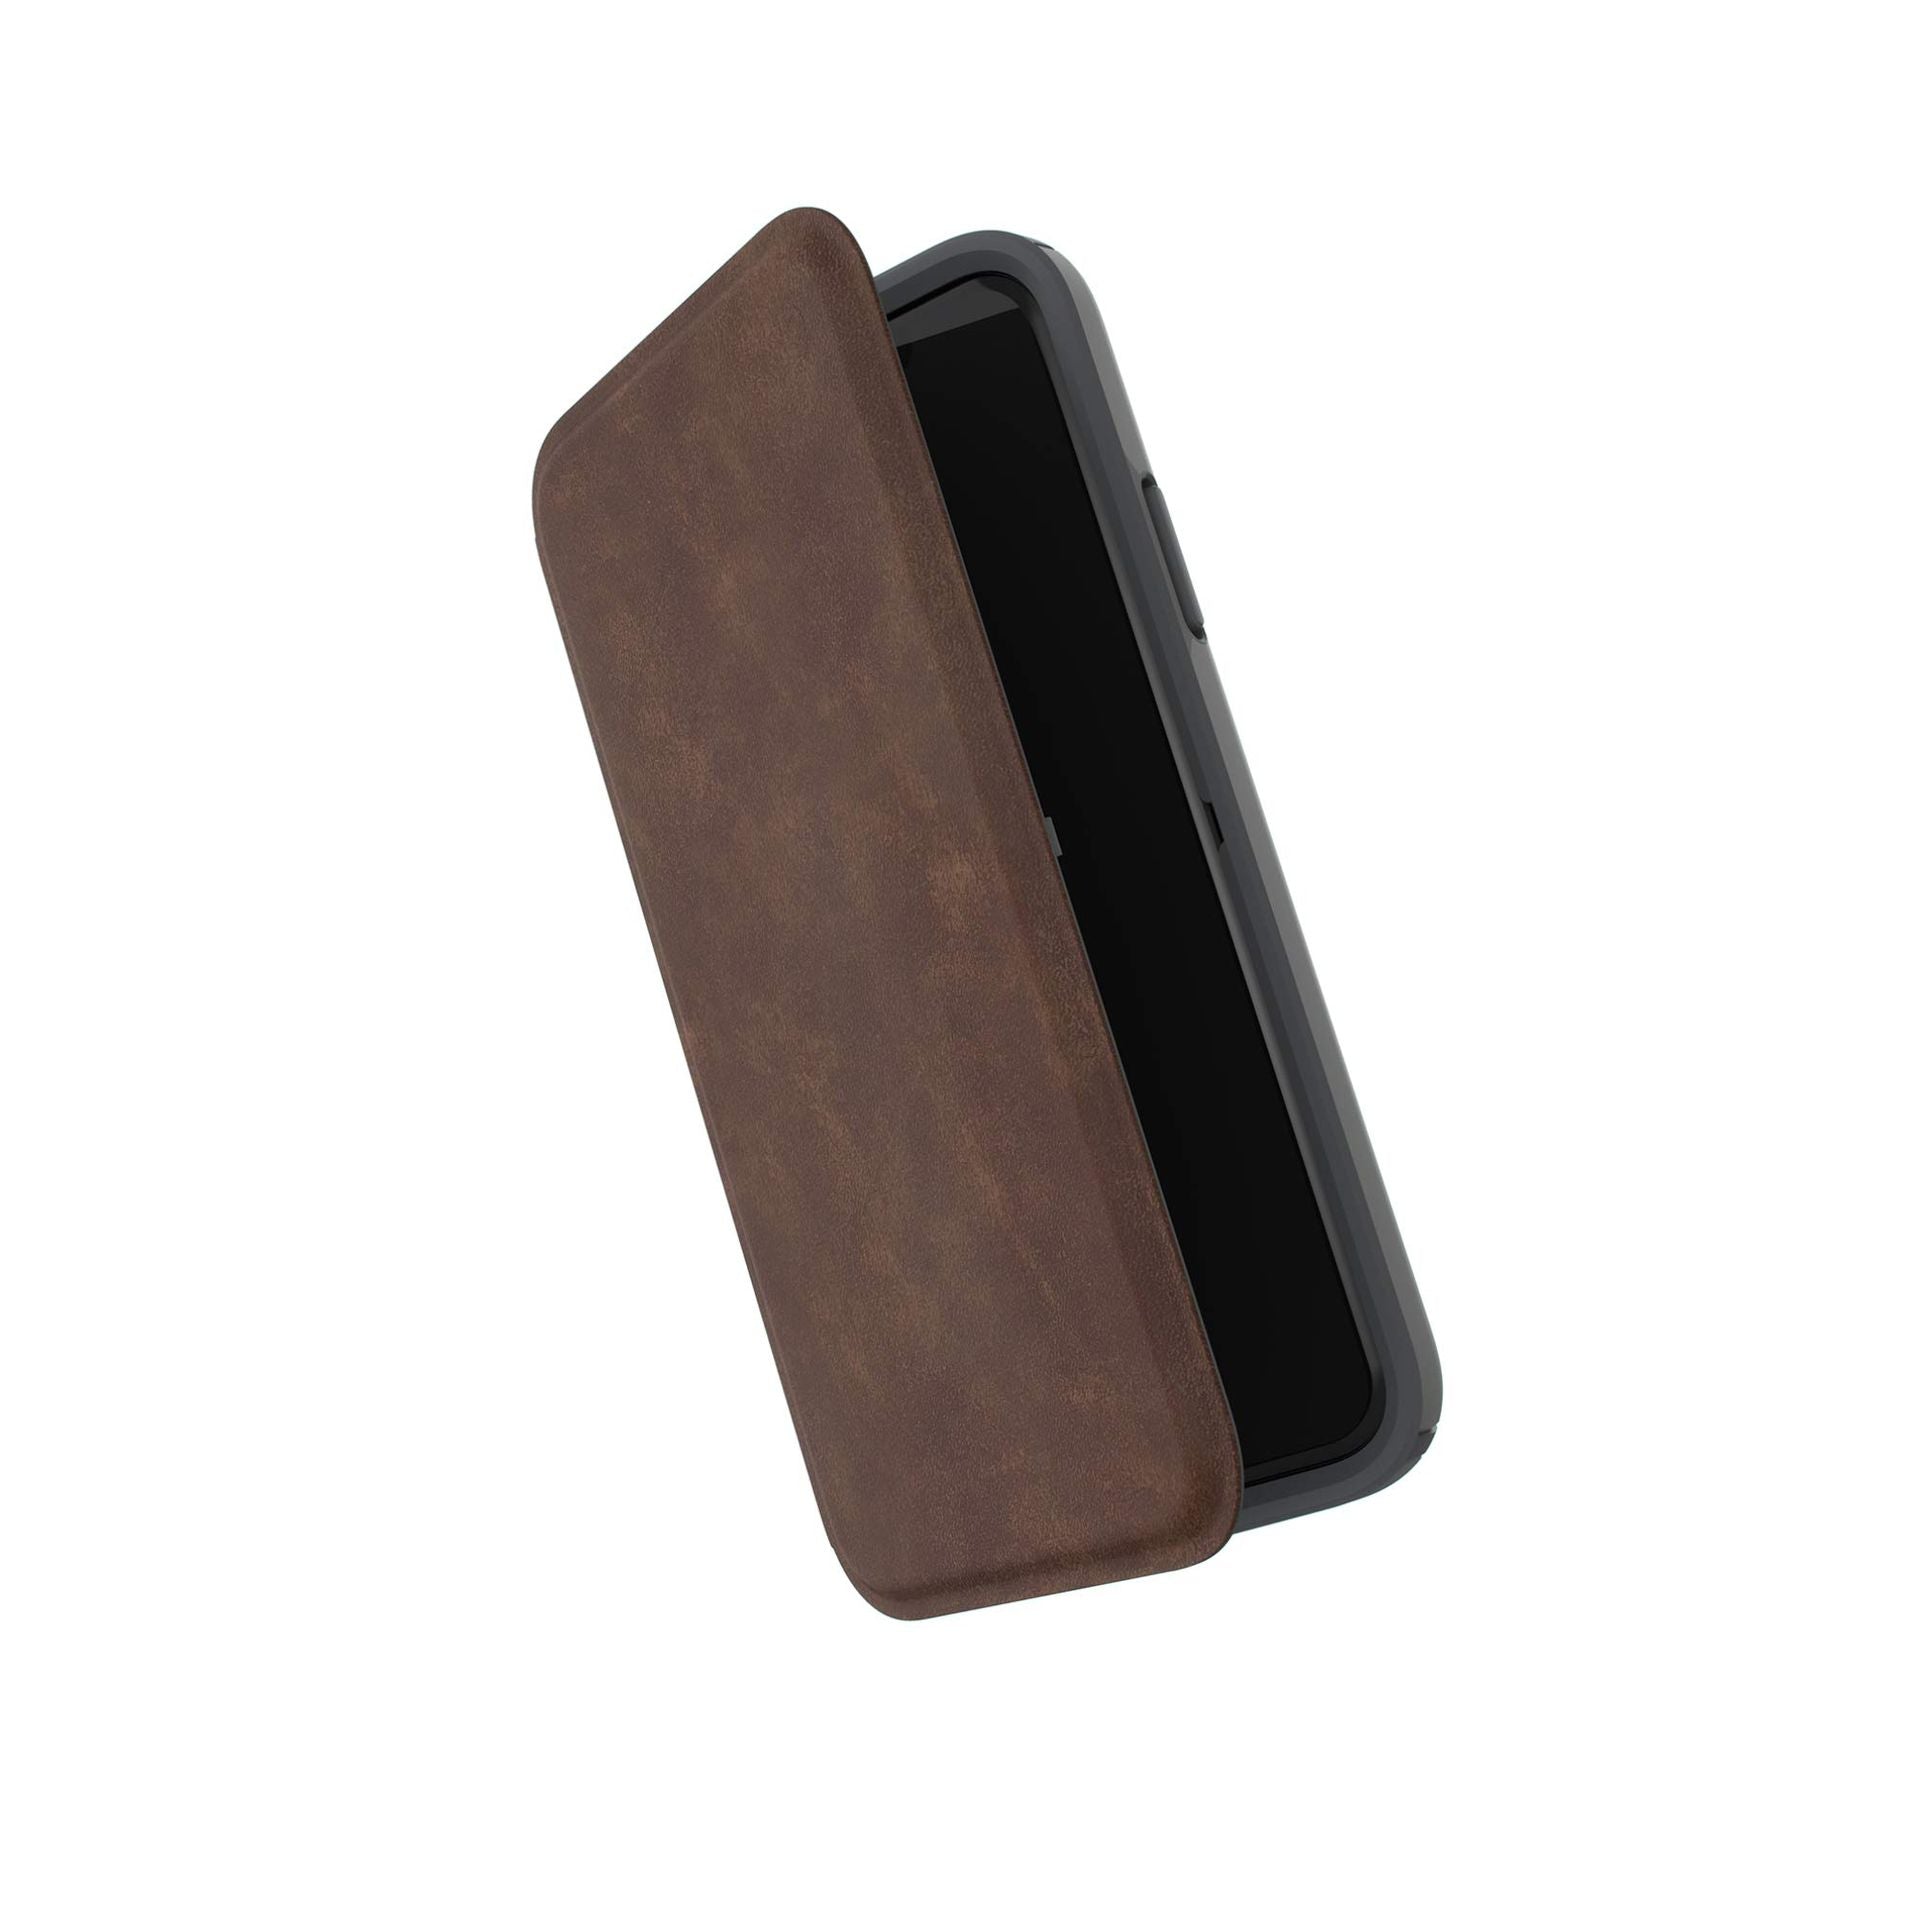 Speck Products Presidio Folio Leather Iphone Xs/Iphone X Case, Saddle Brown/Light Graphite Grey